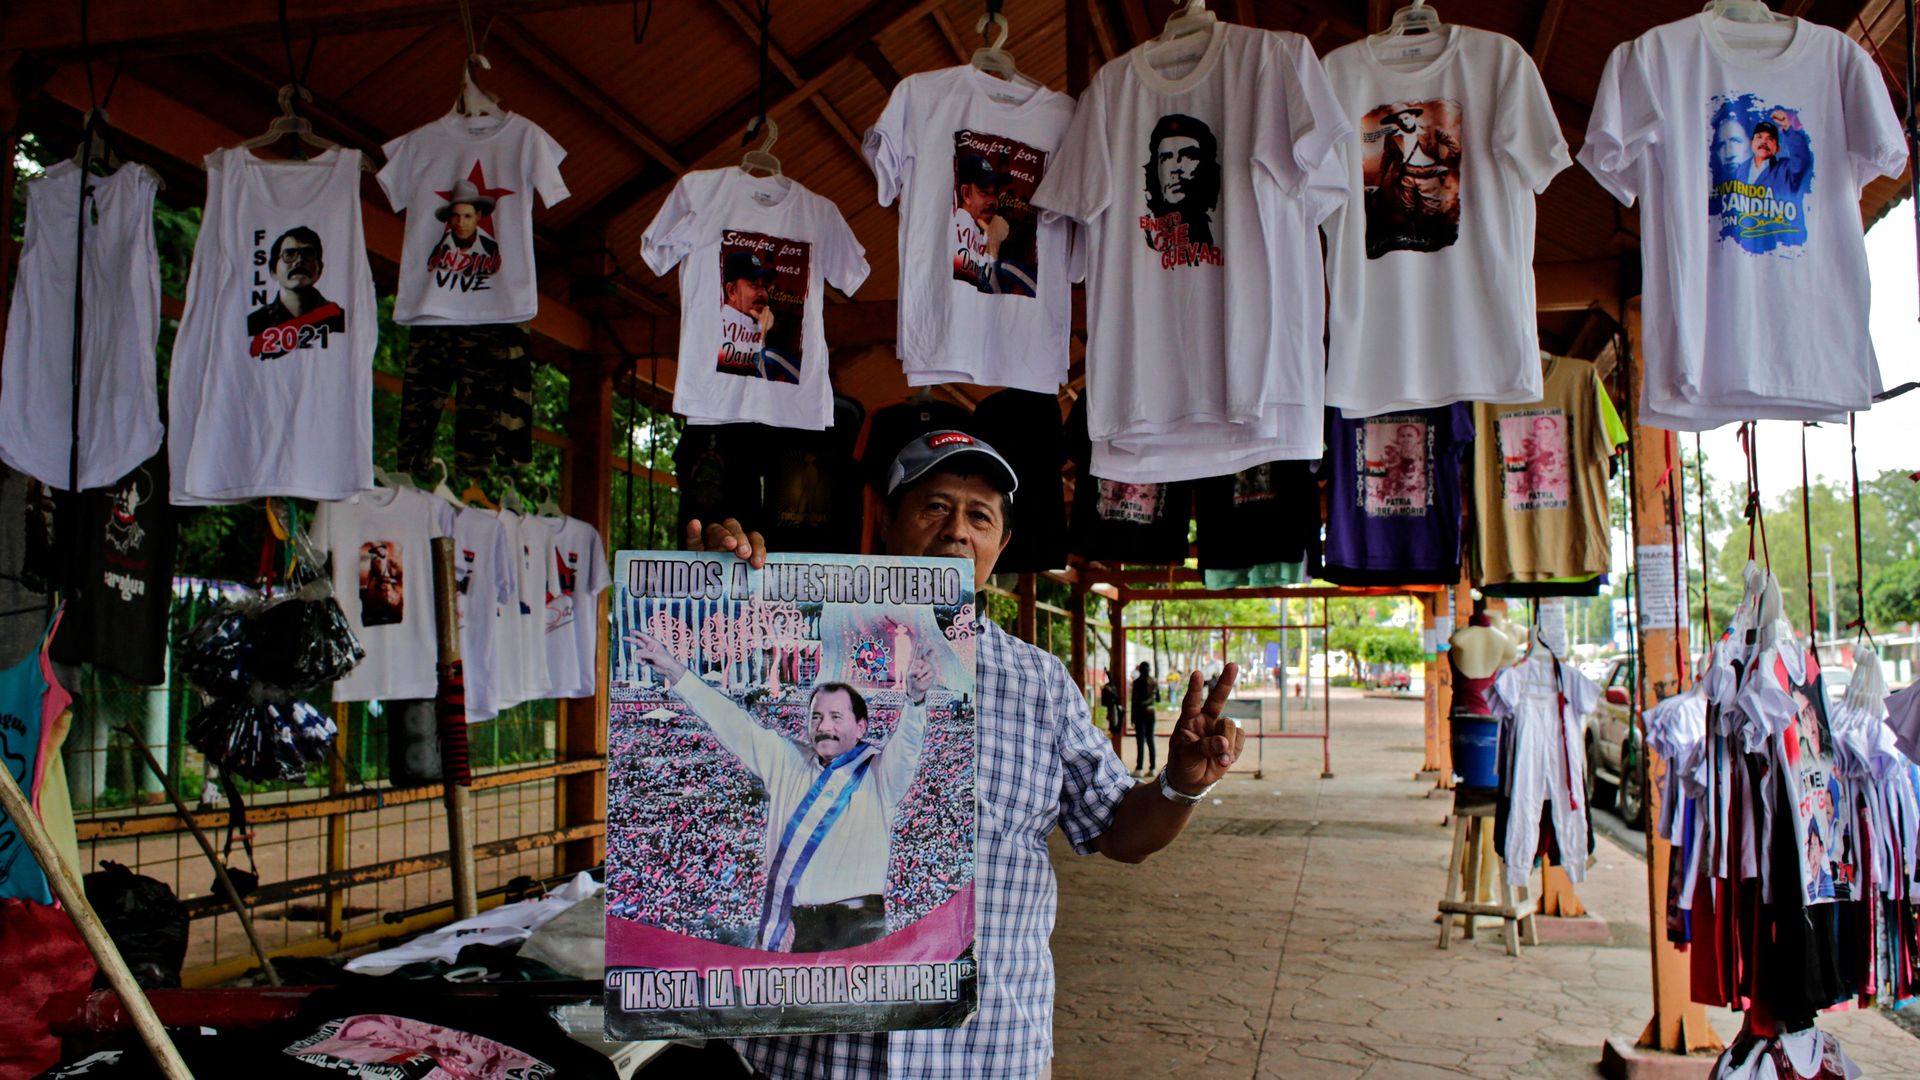 Campaign t-shirts supporting President Daniel Ortega and Vice President/first lady Rosario Murillo hangs in a market stall.